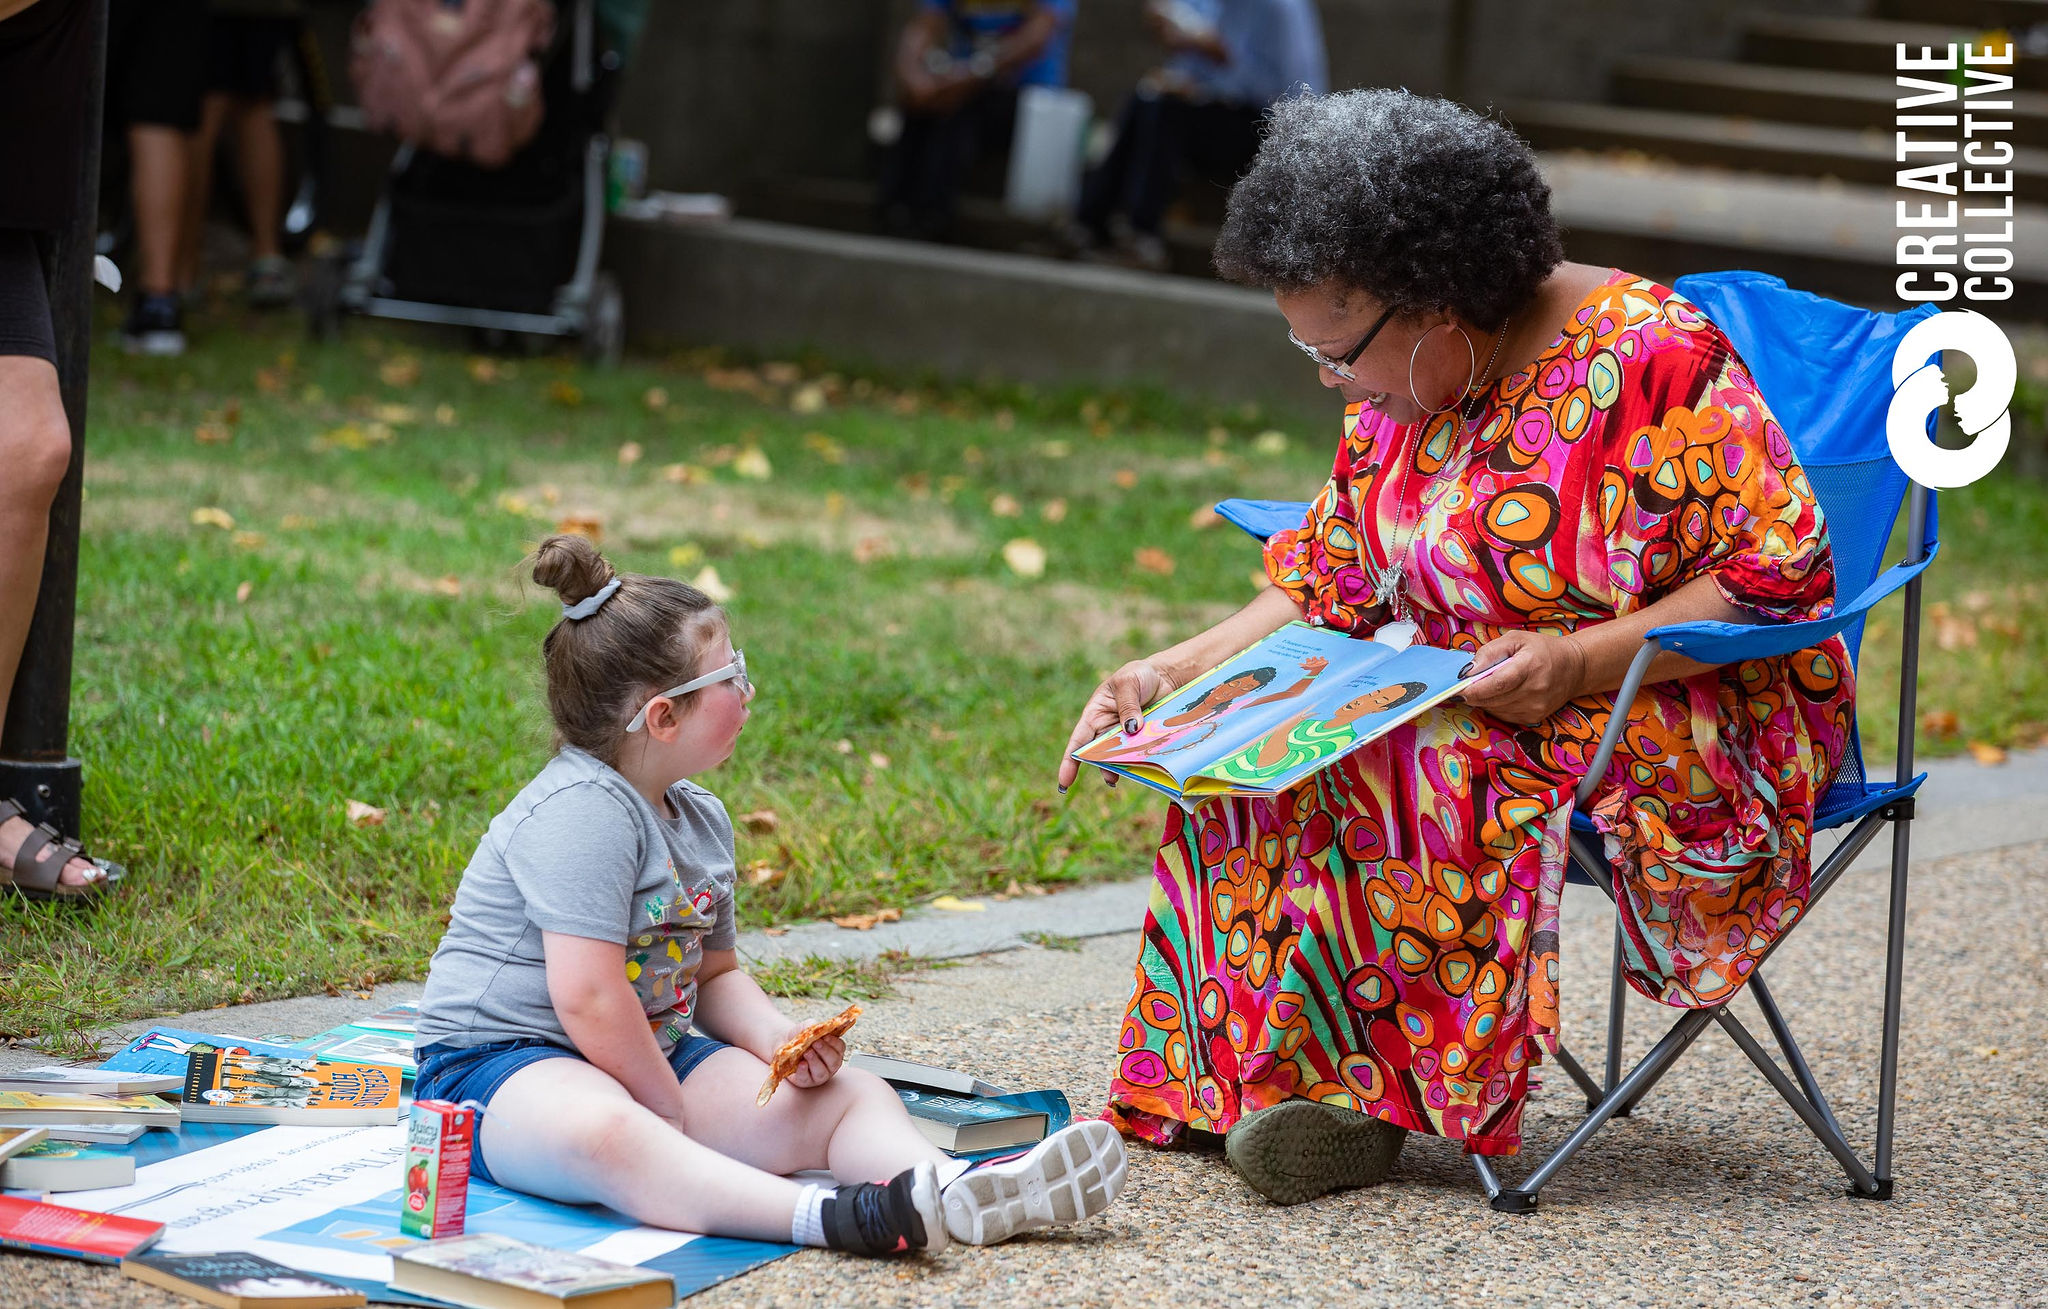 Afrolatina poet Michelle LaPoetica reads a story to a young white girl outside during the Peabody International Festival. Michelle wears a patterned red dress and the girl wears a grey t-shirt and blue shorts.